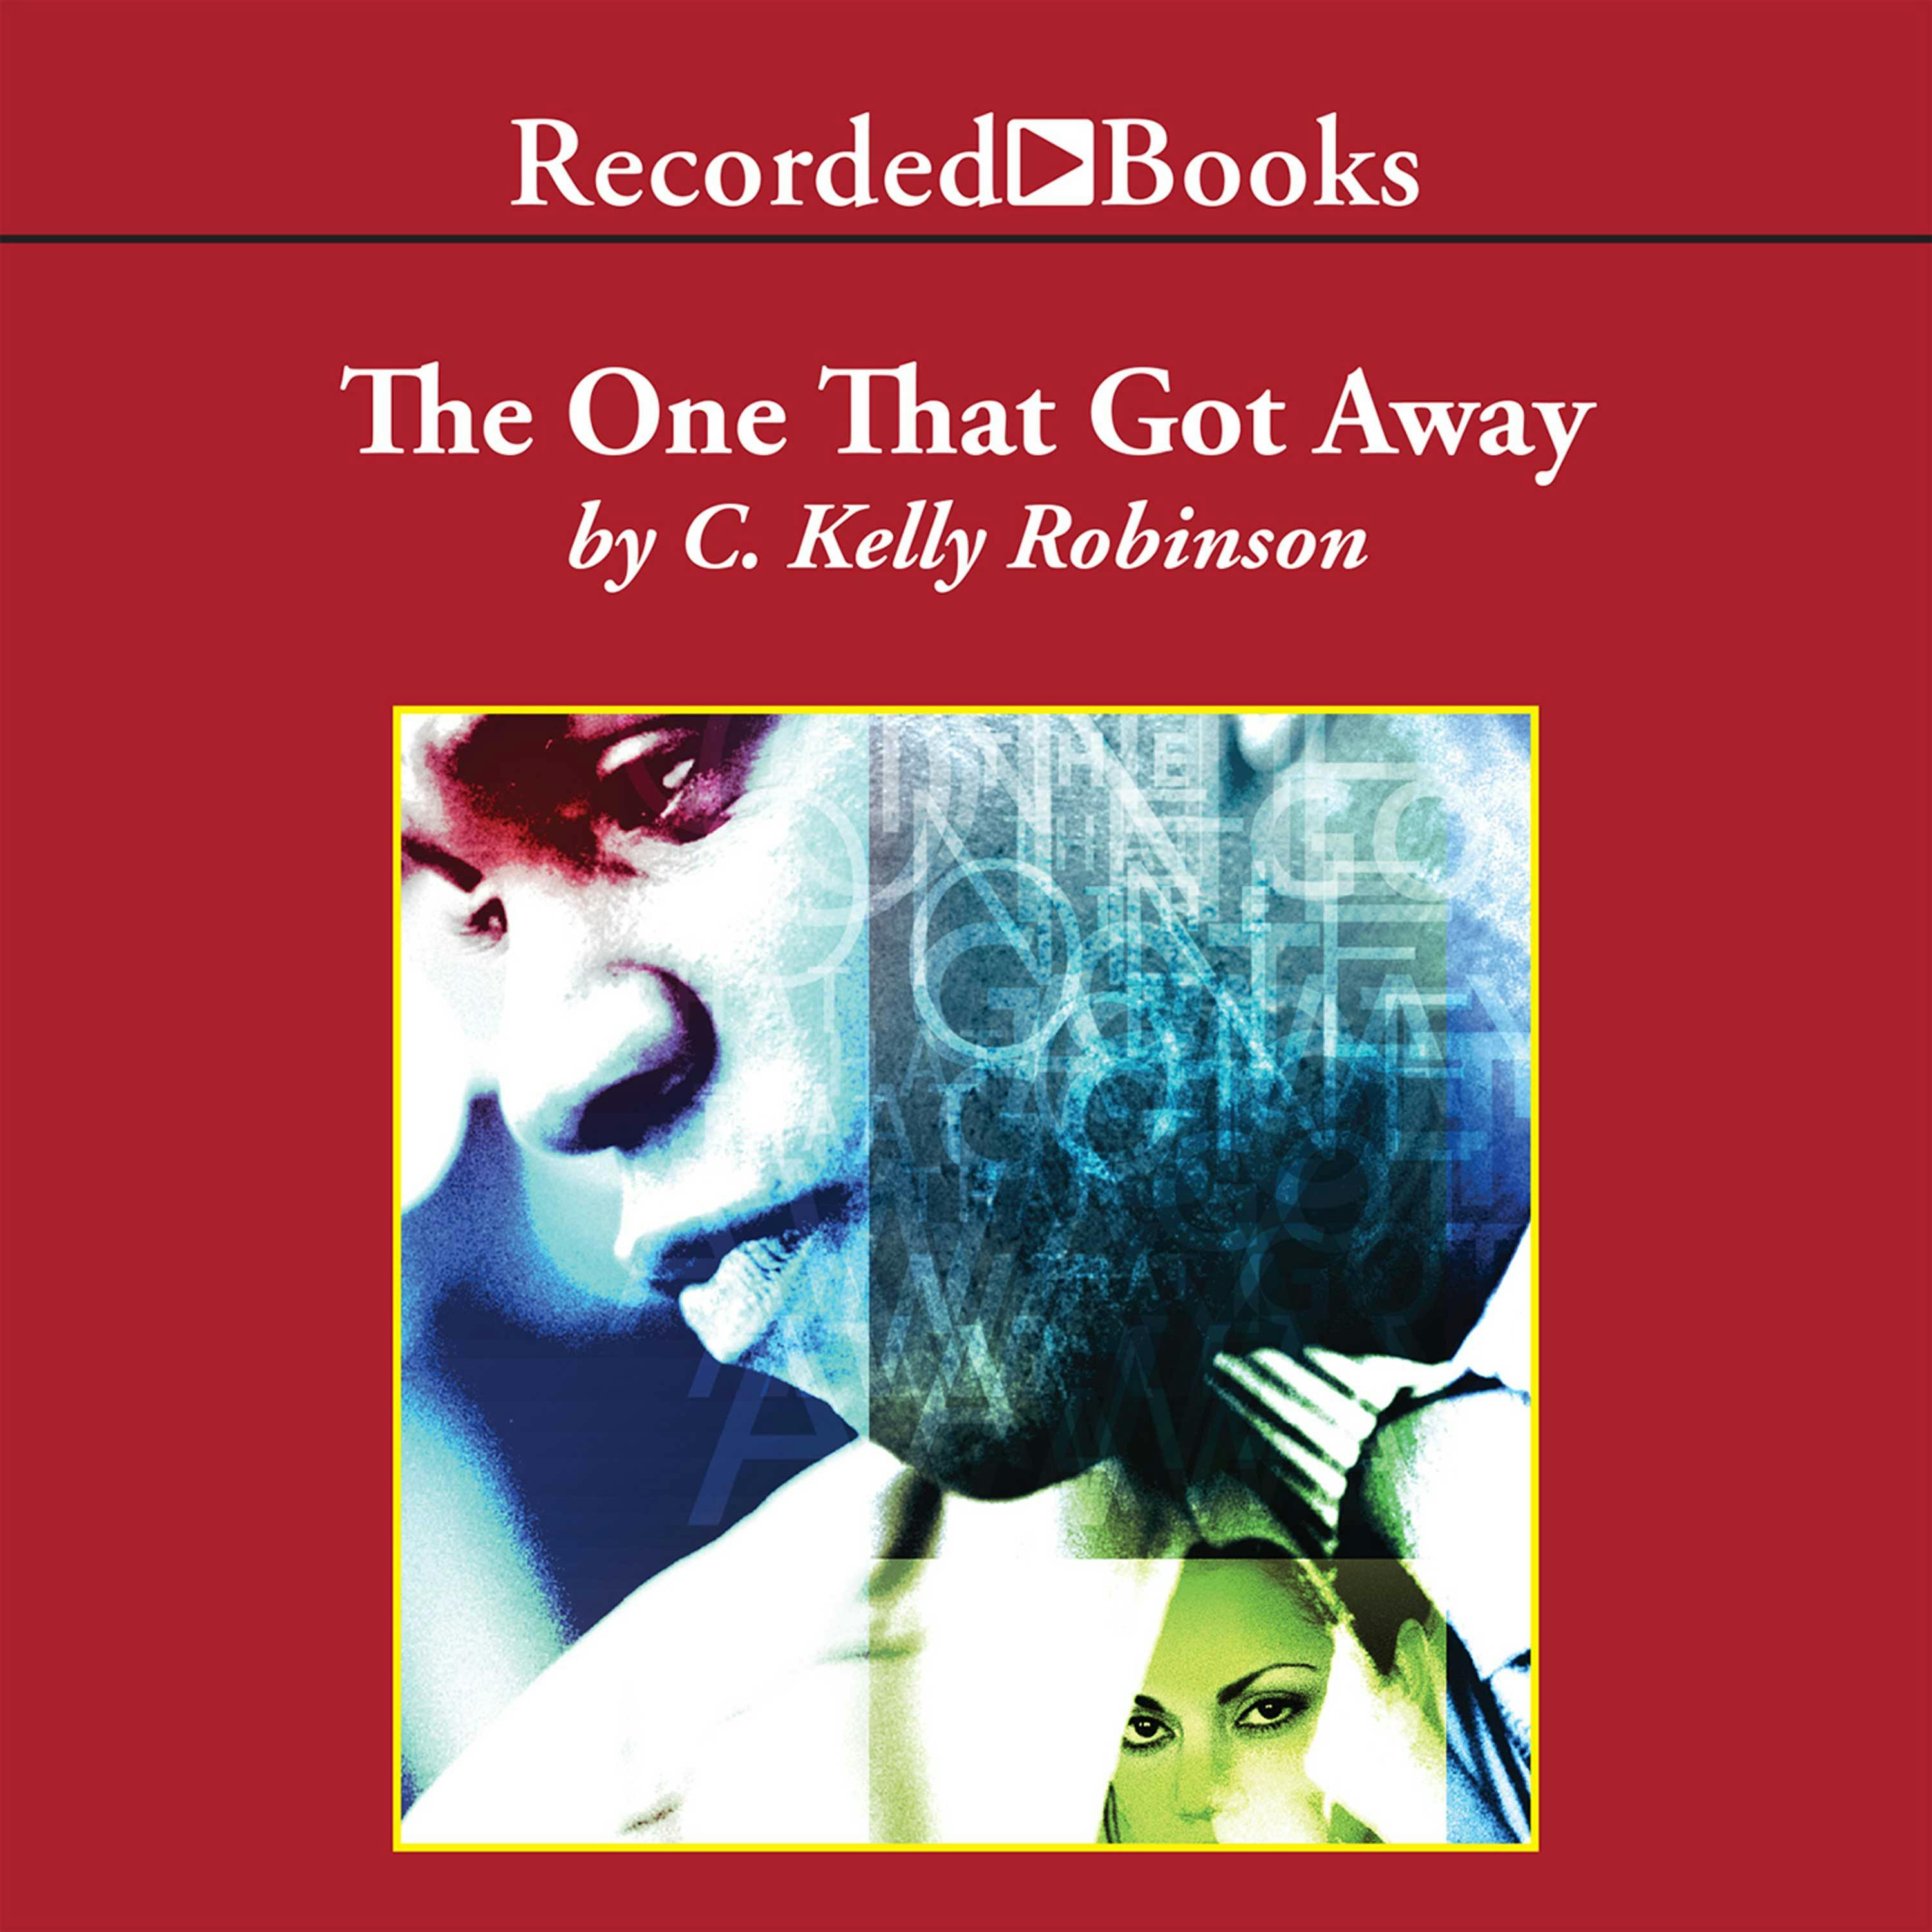 The One That Got Away - C. Kelly Robinson